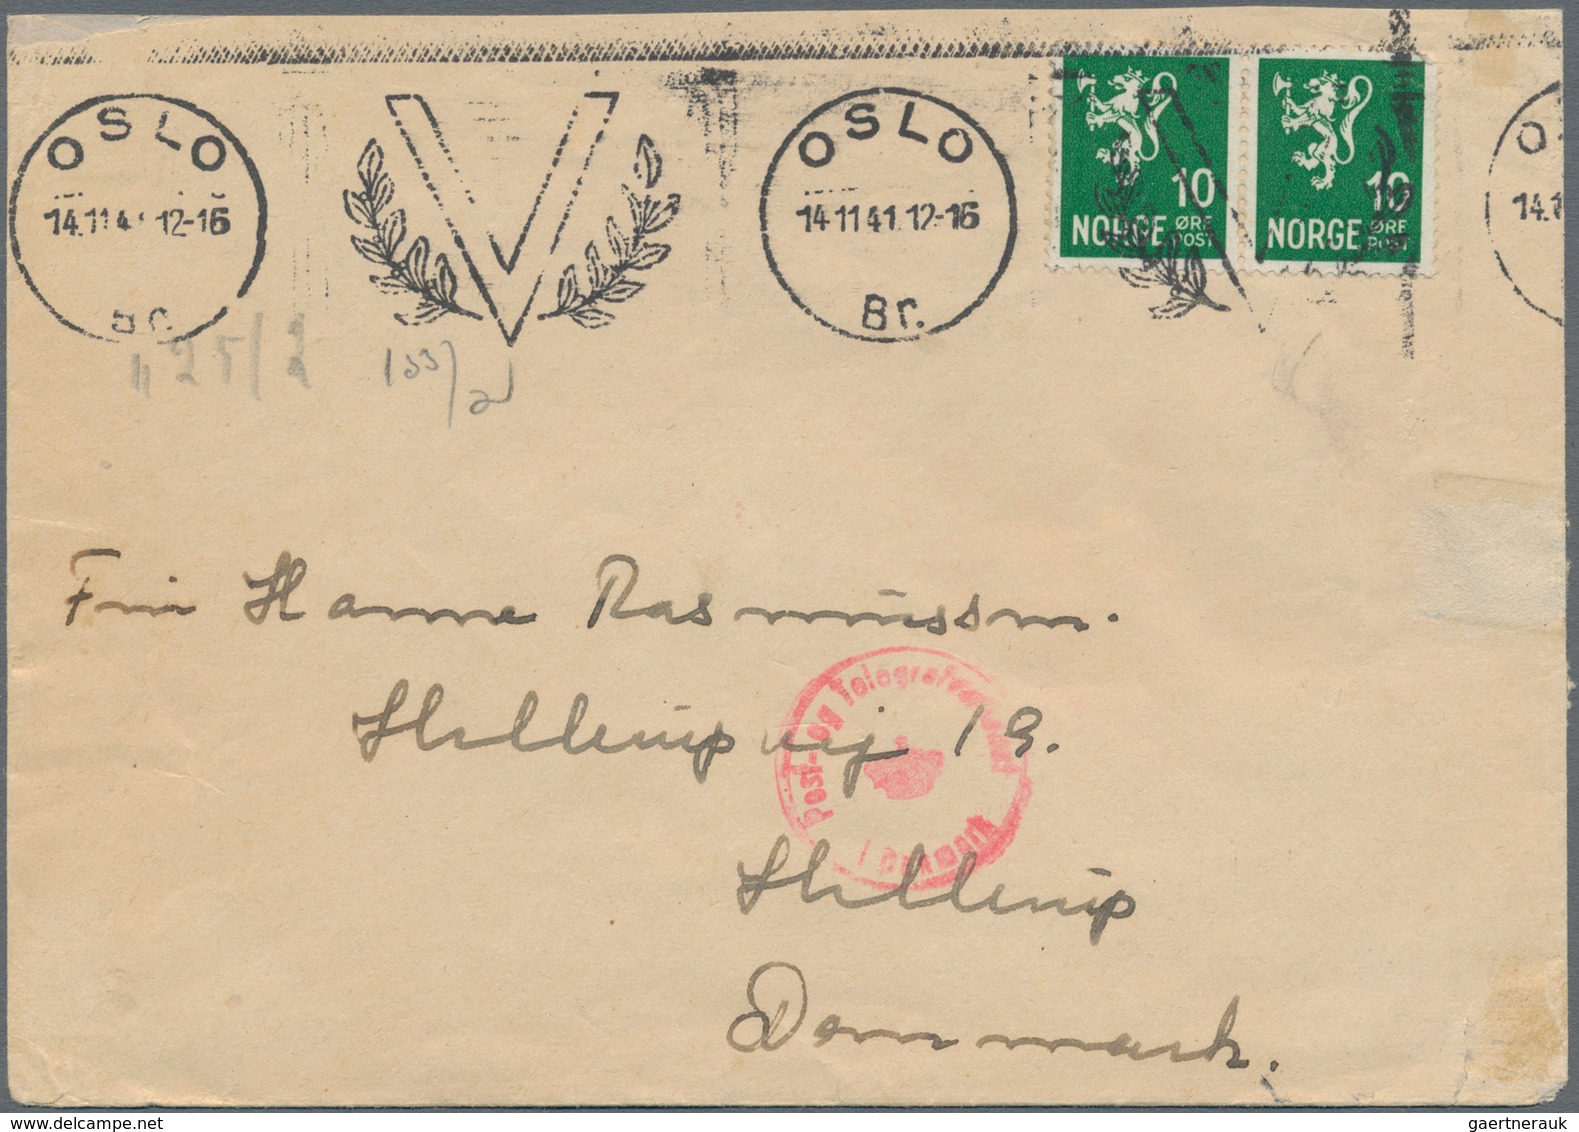 Norwegen: 1856/1970, very interessting lot of covers, postcards and postal stationeries with focus o